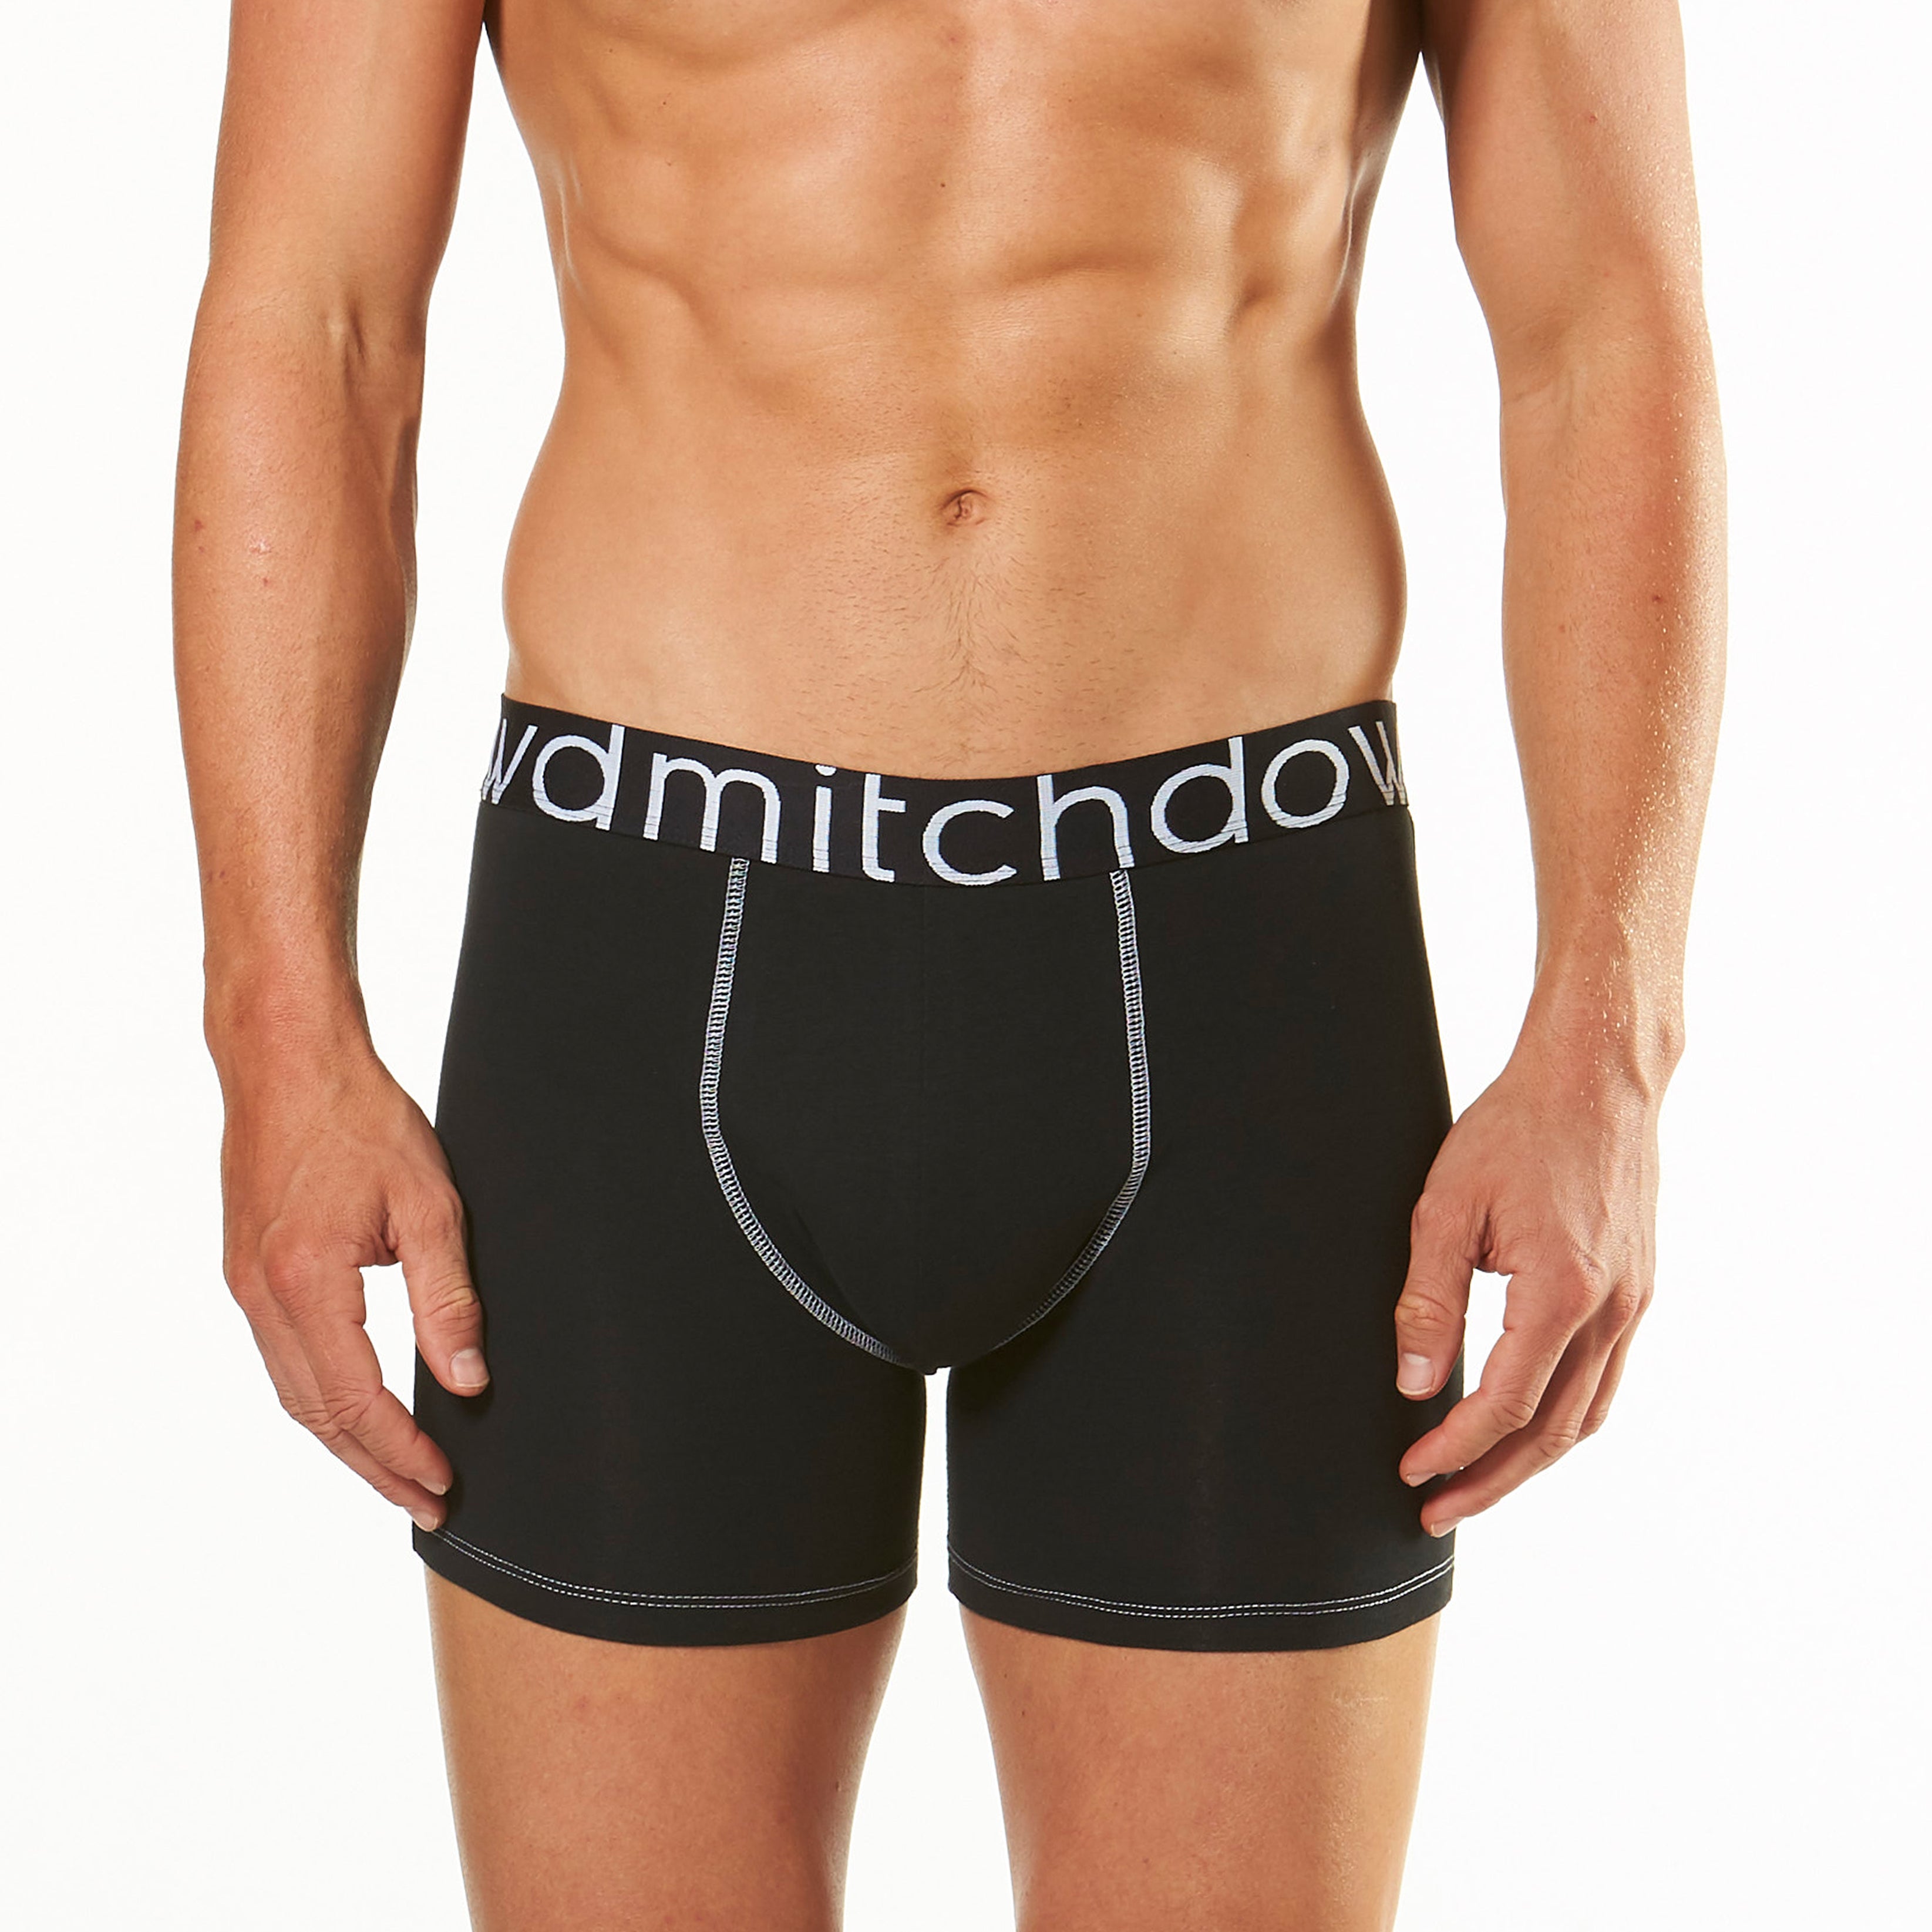 Men's Room to Move Long Leg Trunk - Black - Buy Online at Mitch Dowd